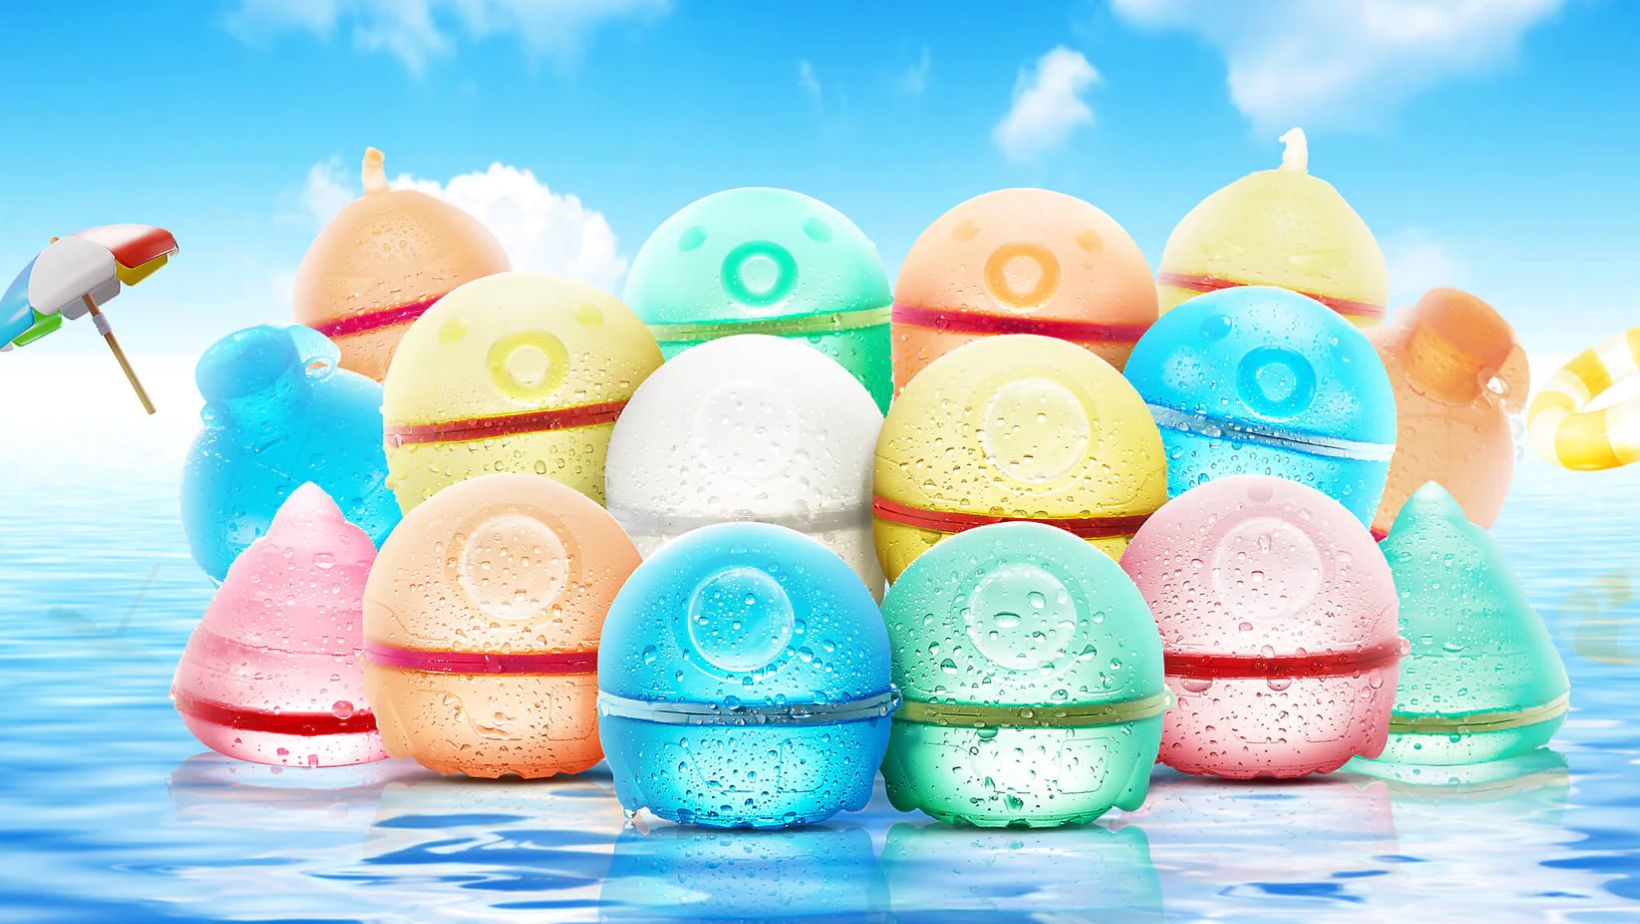 5 Amazing Reasons to Use Refillable Water Balloons